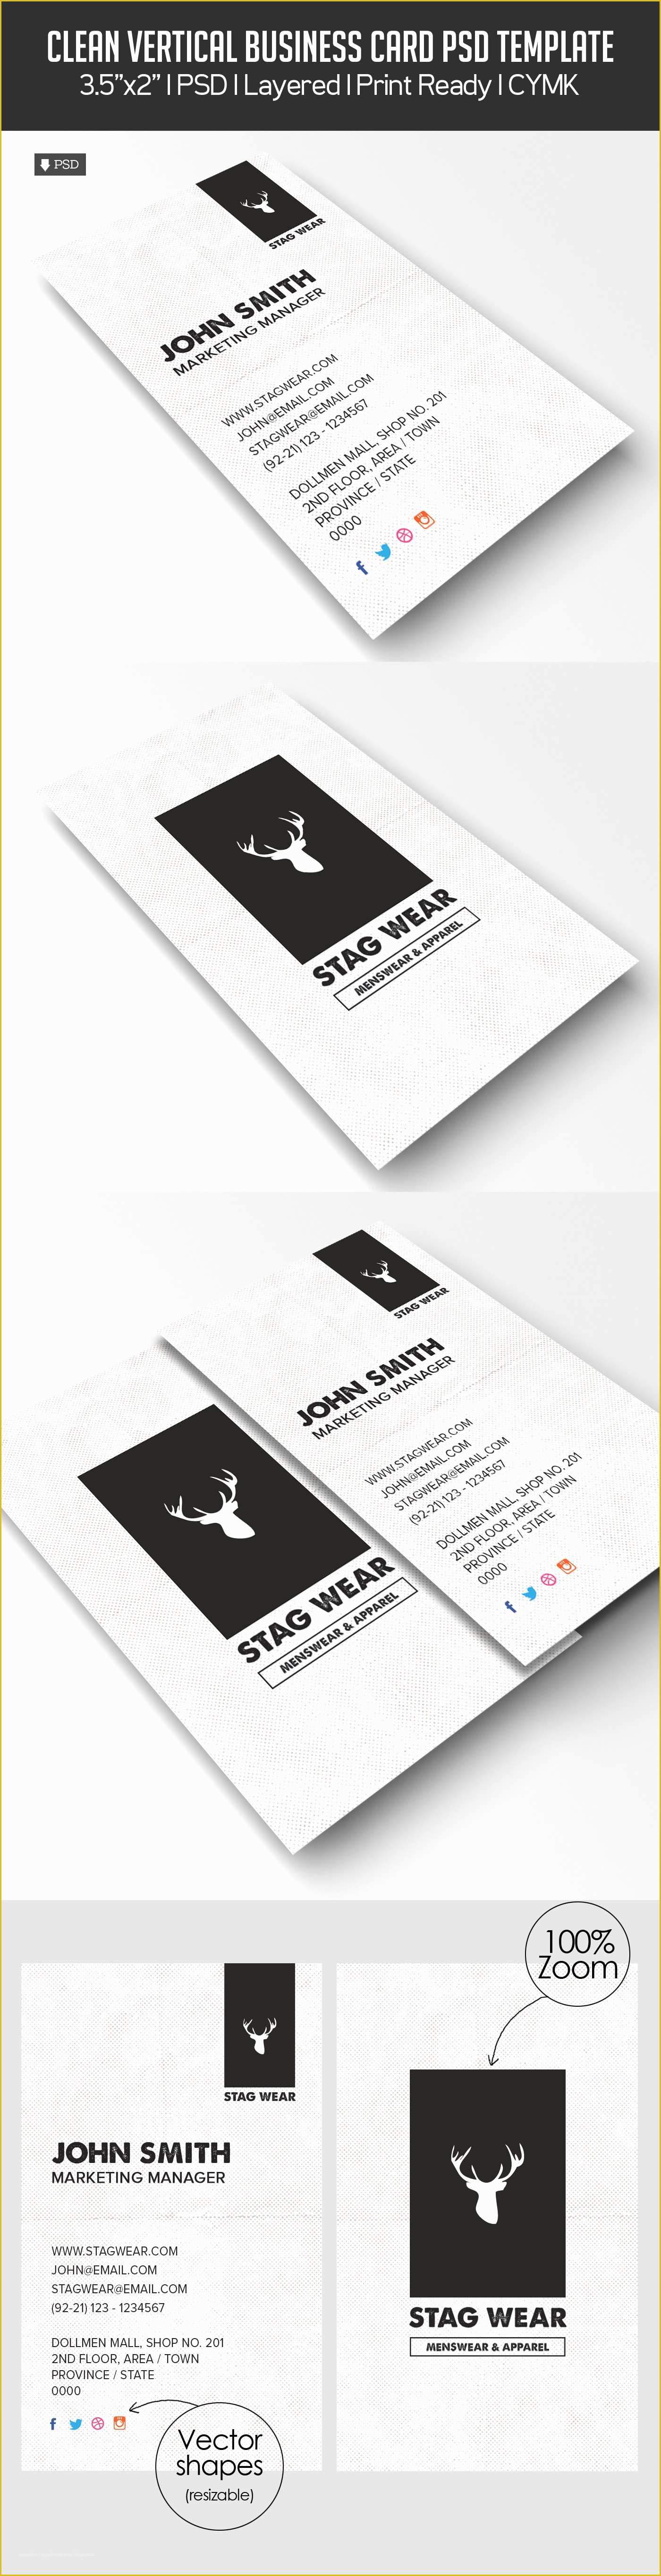 Free Vertical Business Card Template Of Freebie – Vertical Business Card Psd Template